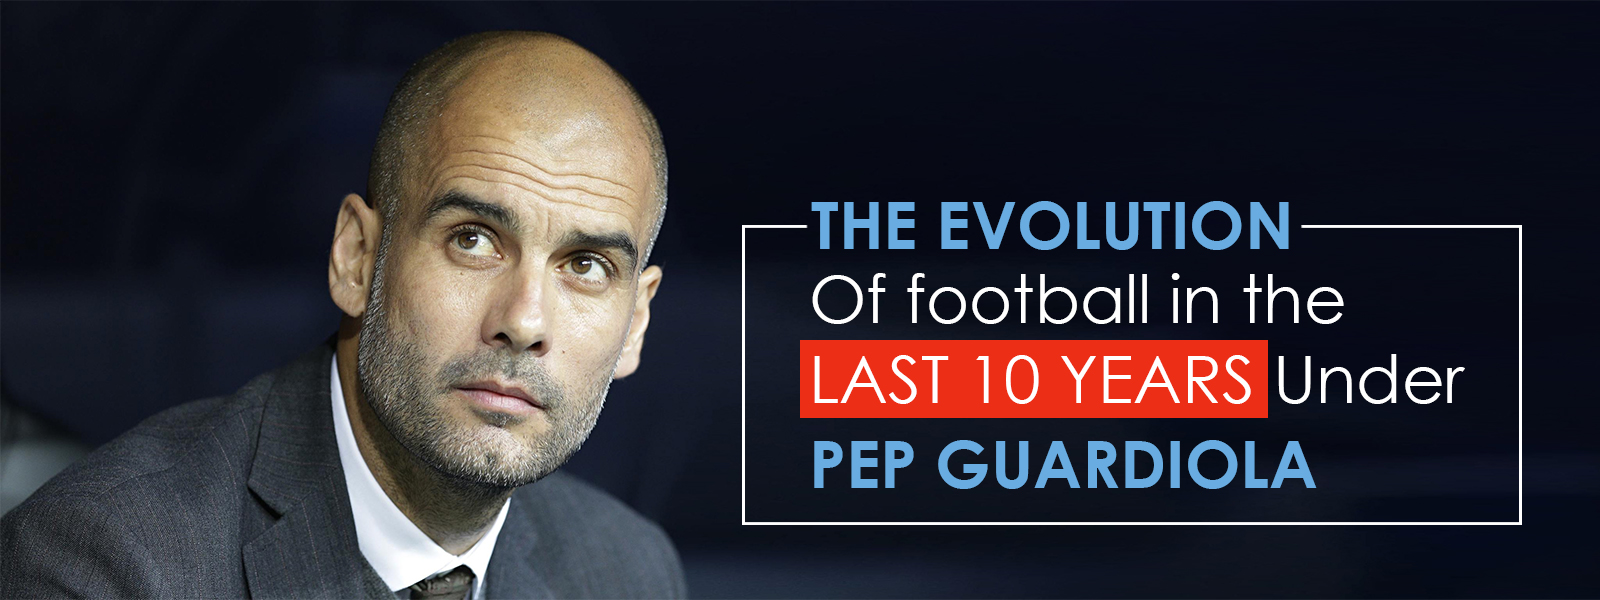 The Evolution Of Football In The Last 10 Years Under Pep Guardiola